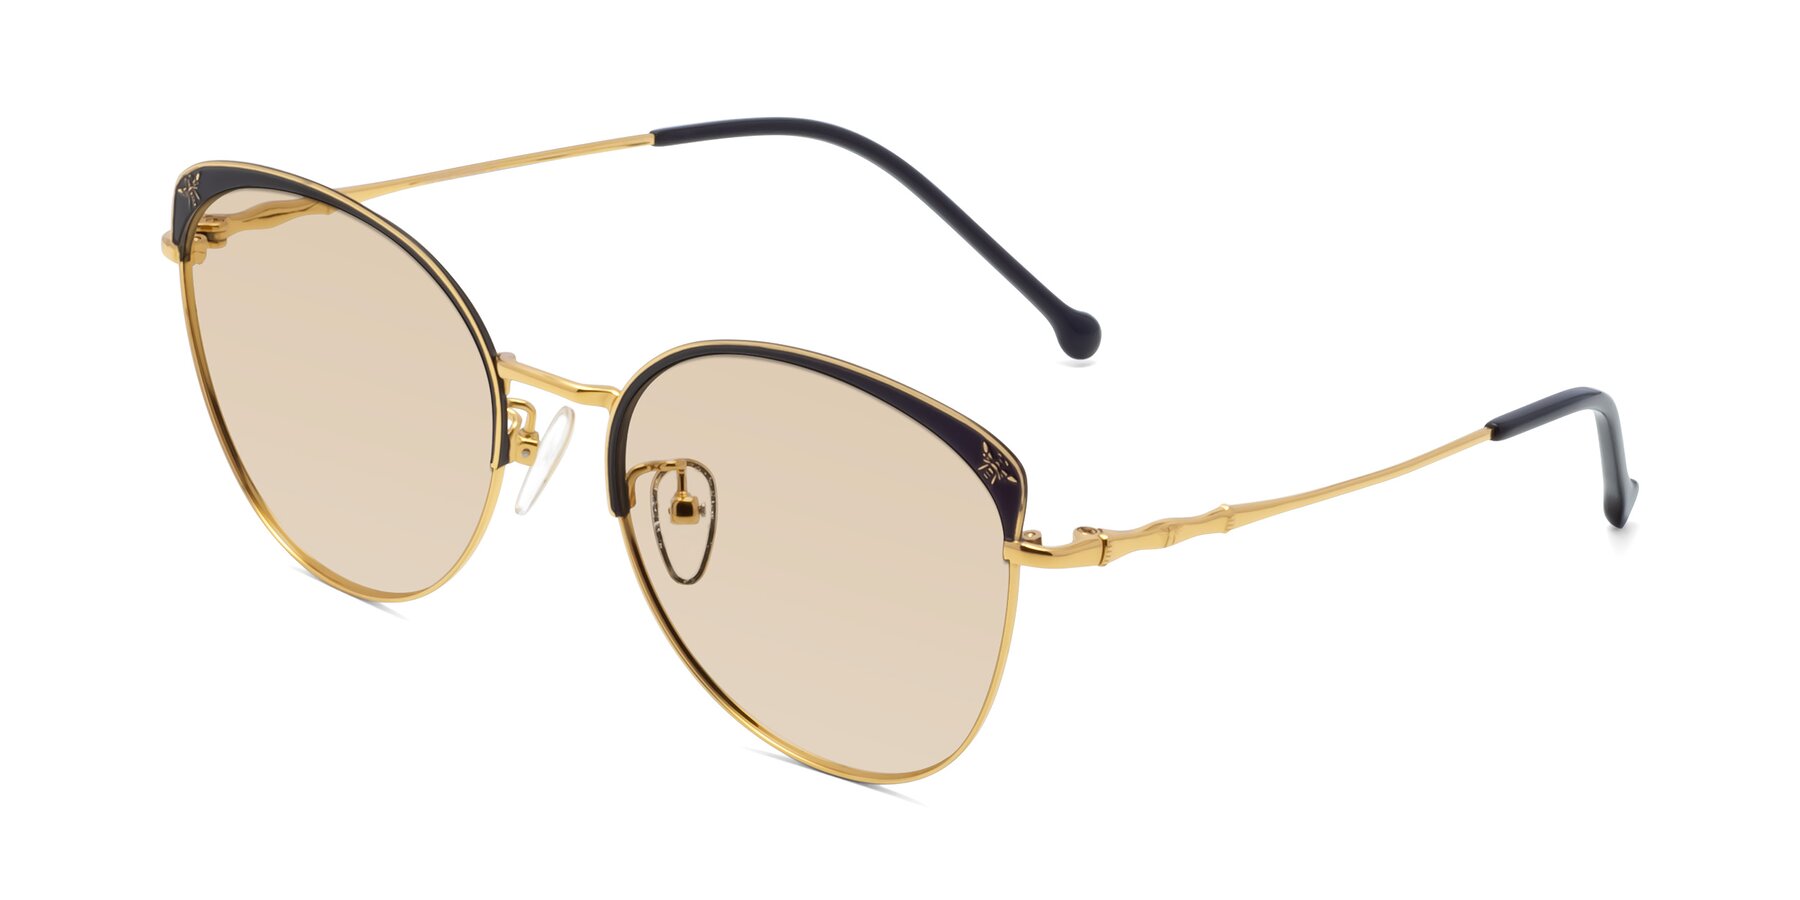 Angle of 18019 in Black-Gold with Light Brown Tinted Lenses